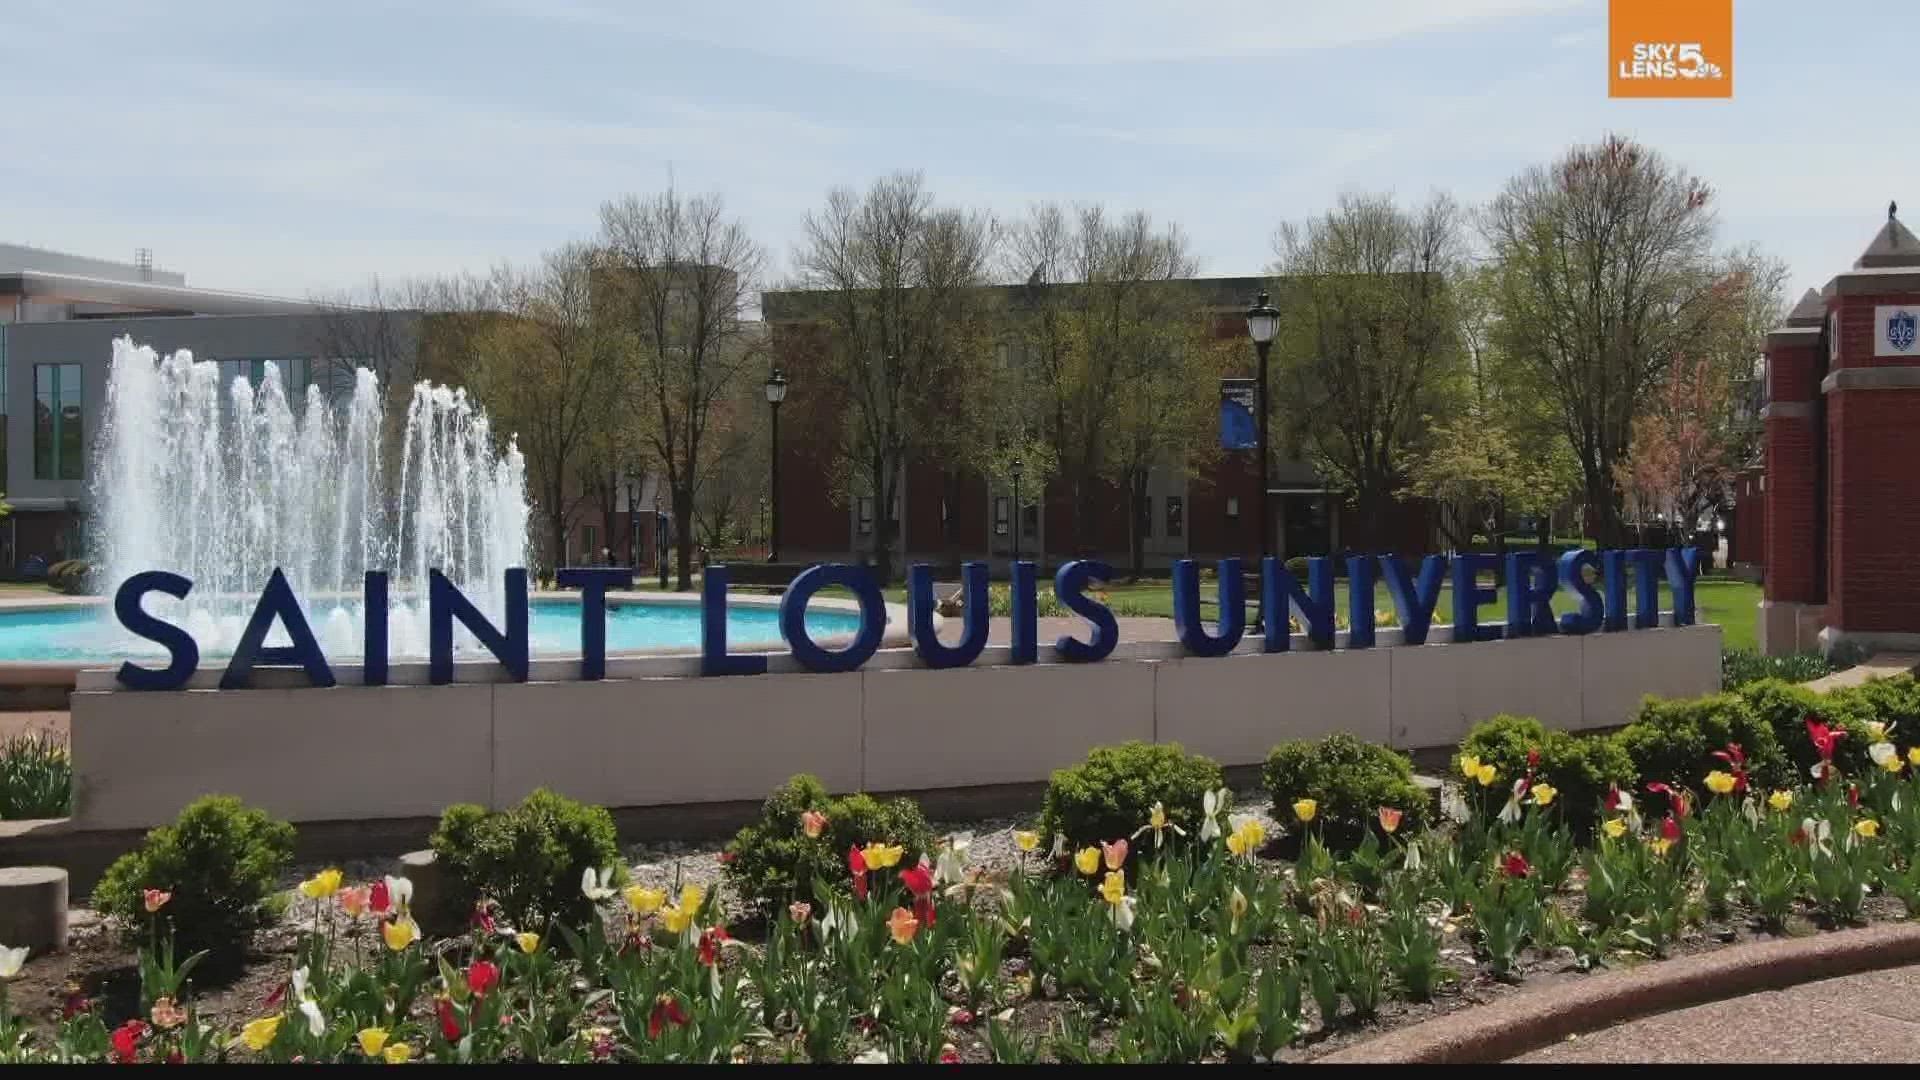 Saint Louis University has made mental health access a top priority. Since fall, the university has lost four students to suicide.